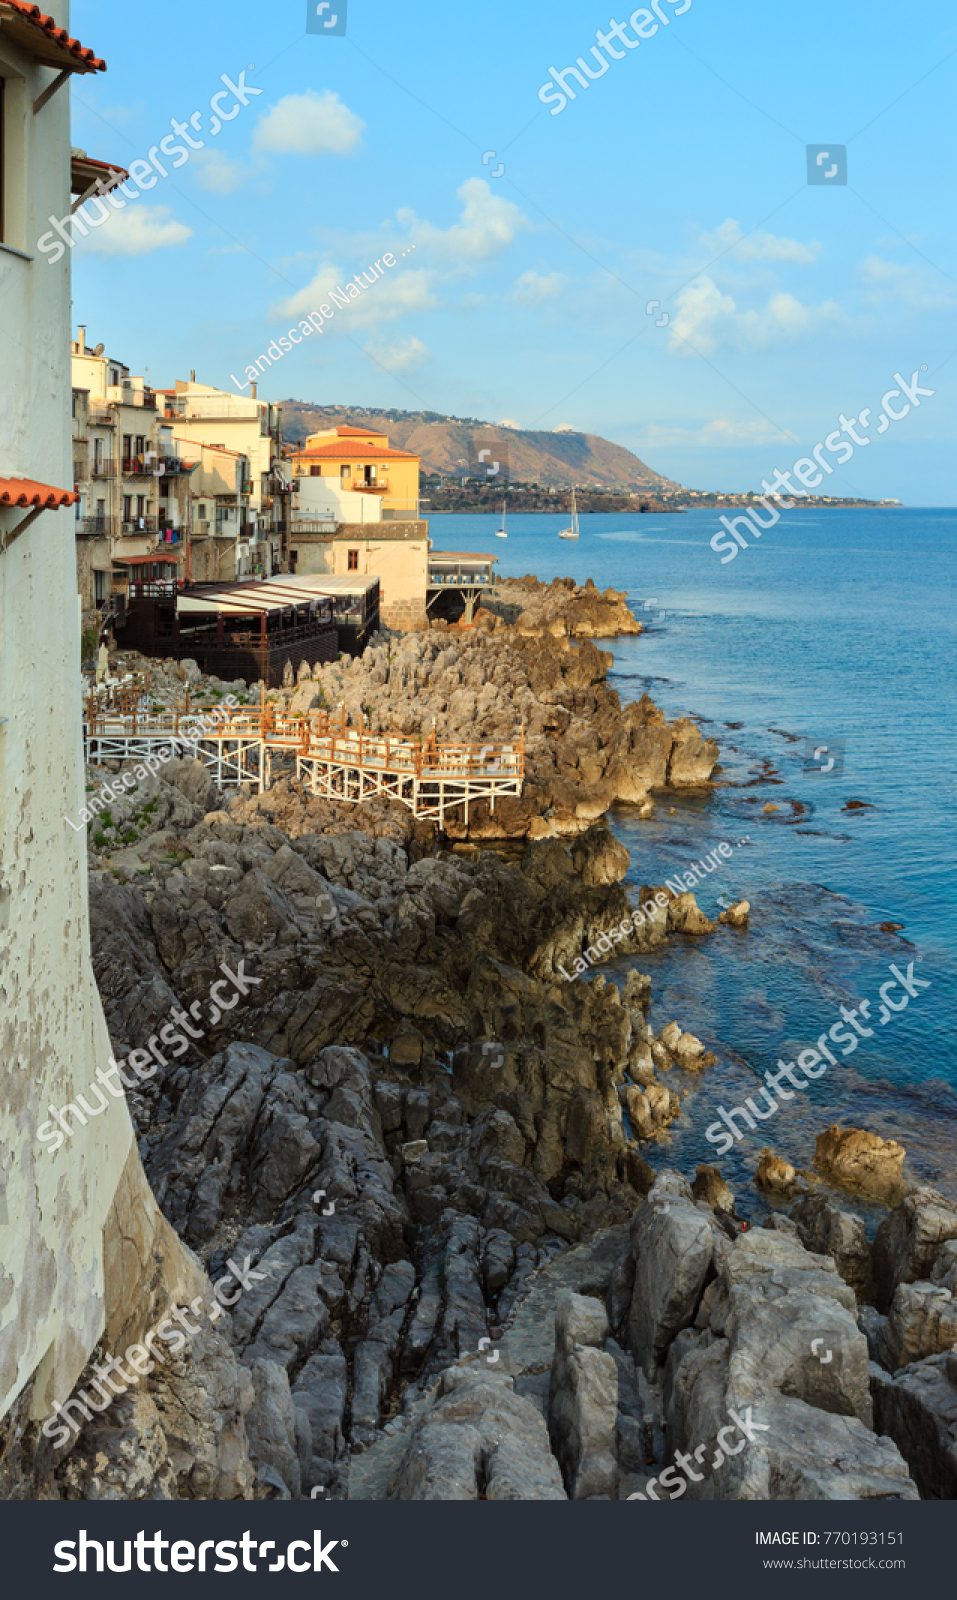 Cefalu Old Beautiful Town Stock Now) 770193151